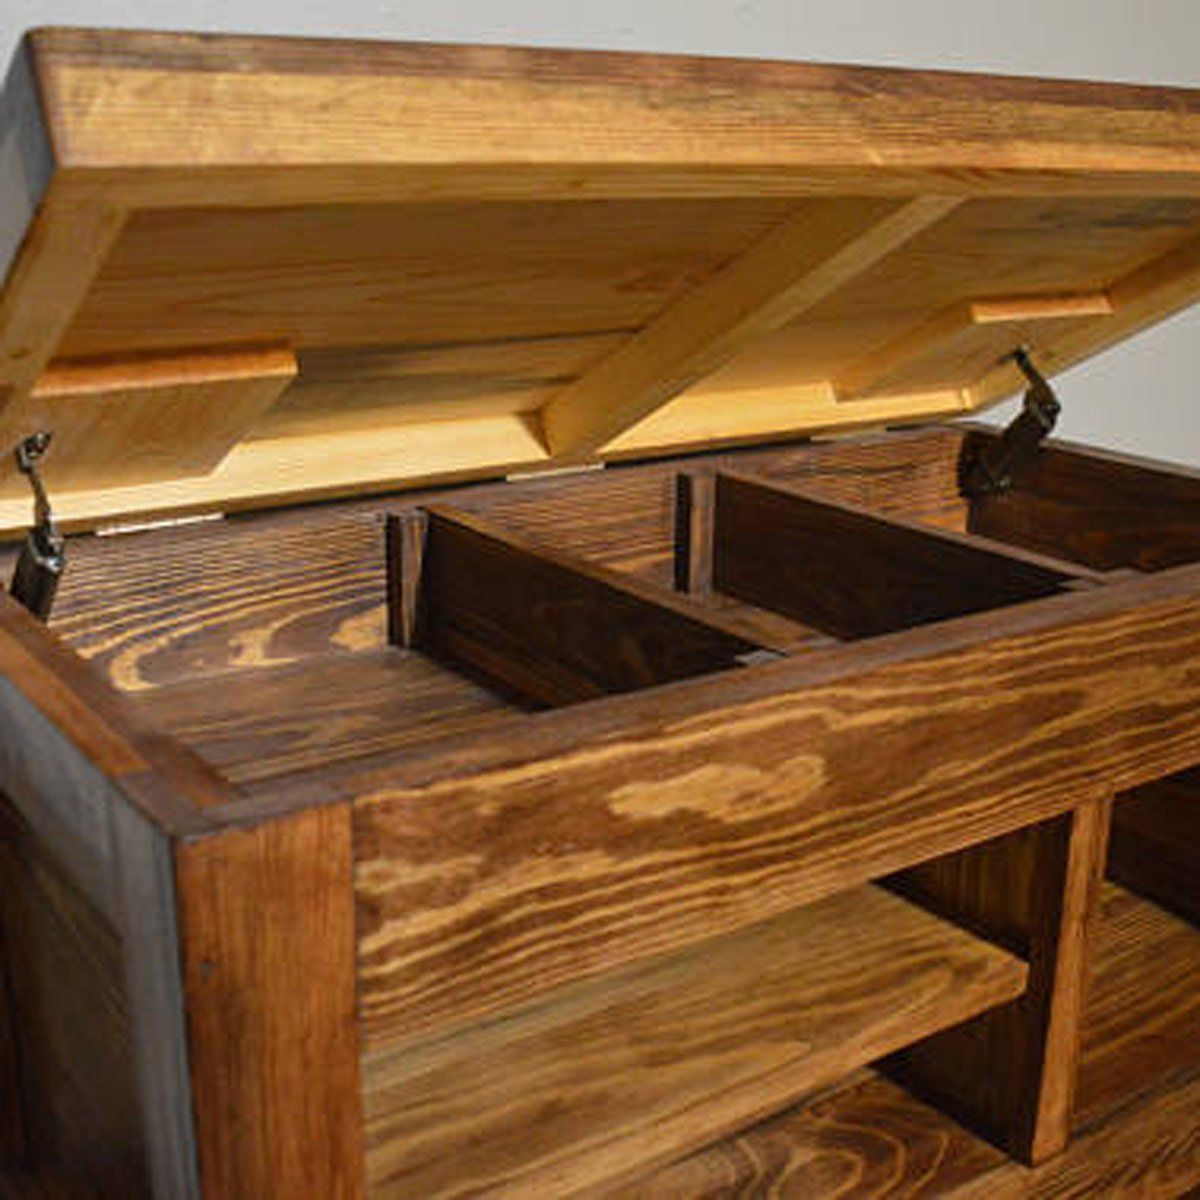 10 Pieces of Furniture with Hidden Compartments Secret compartment